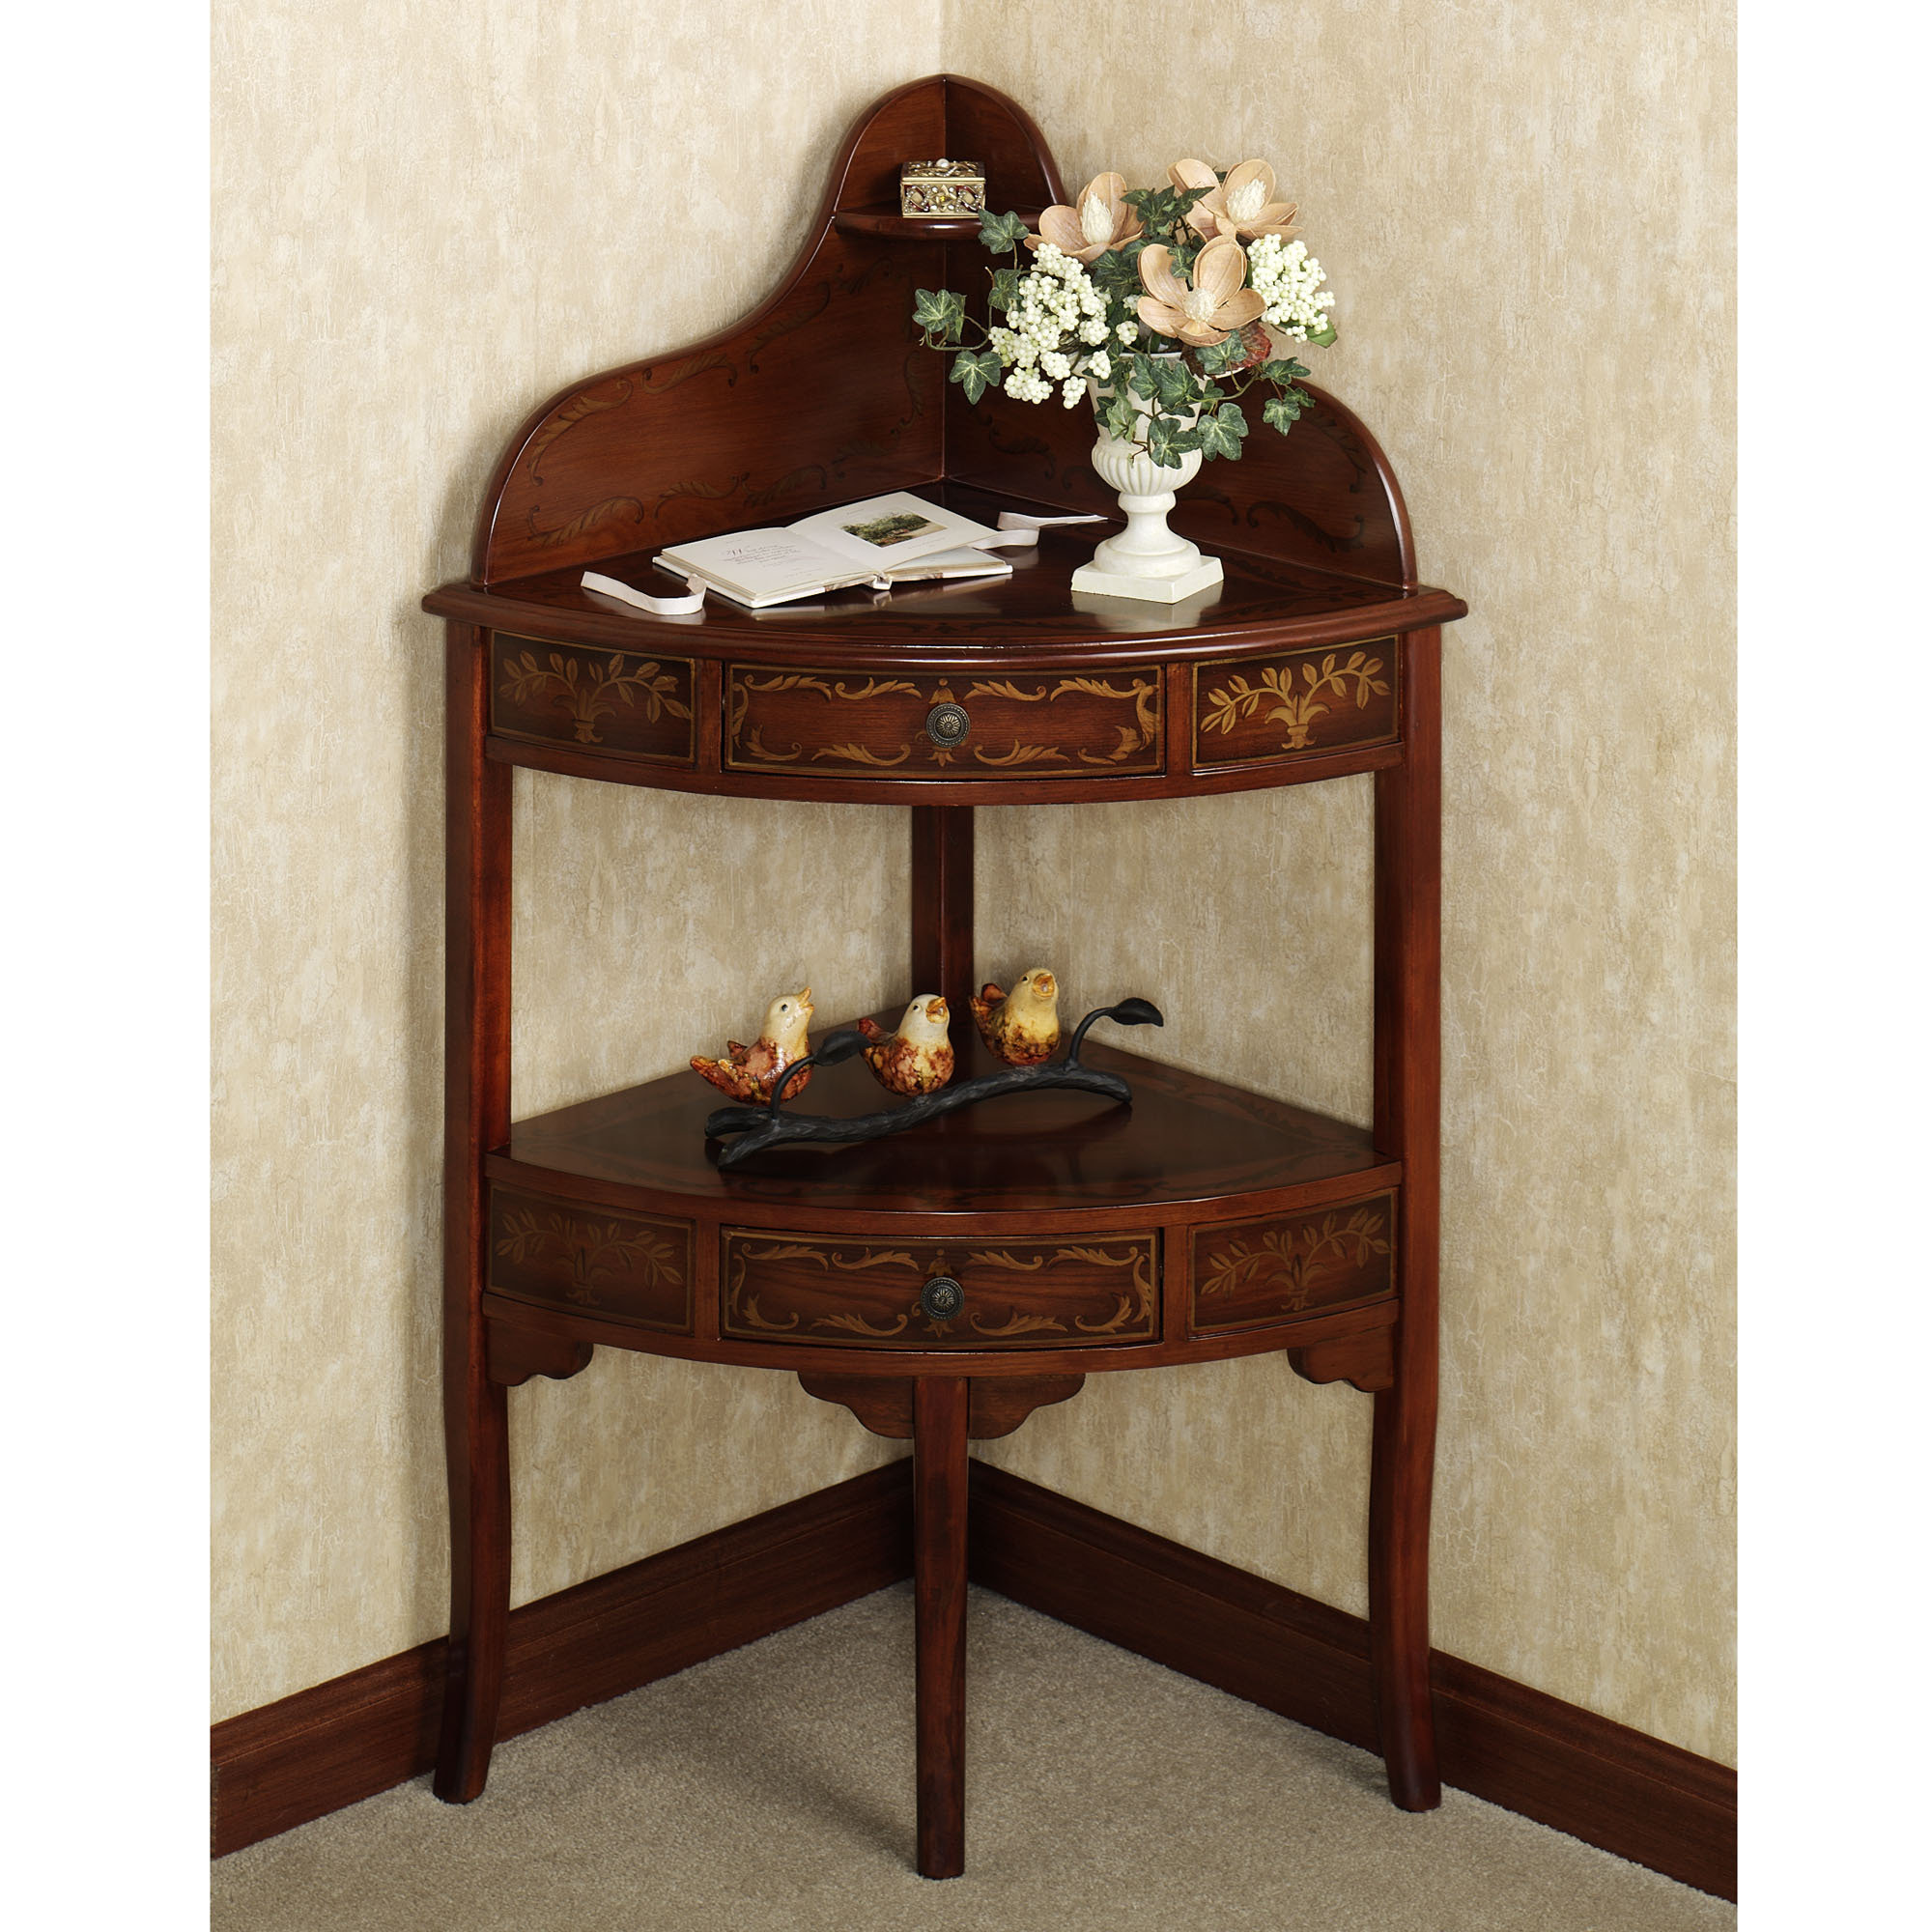 corner accent table ideas elegant home design designing living black solid wood coffee ginger jar lamps iron frame queen uttermost side baby relax glider small bench round